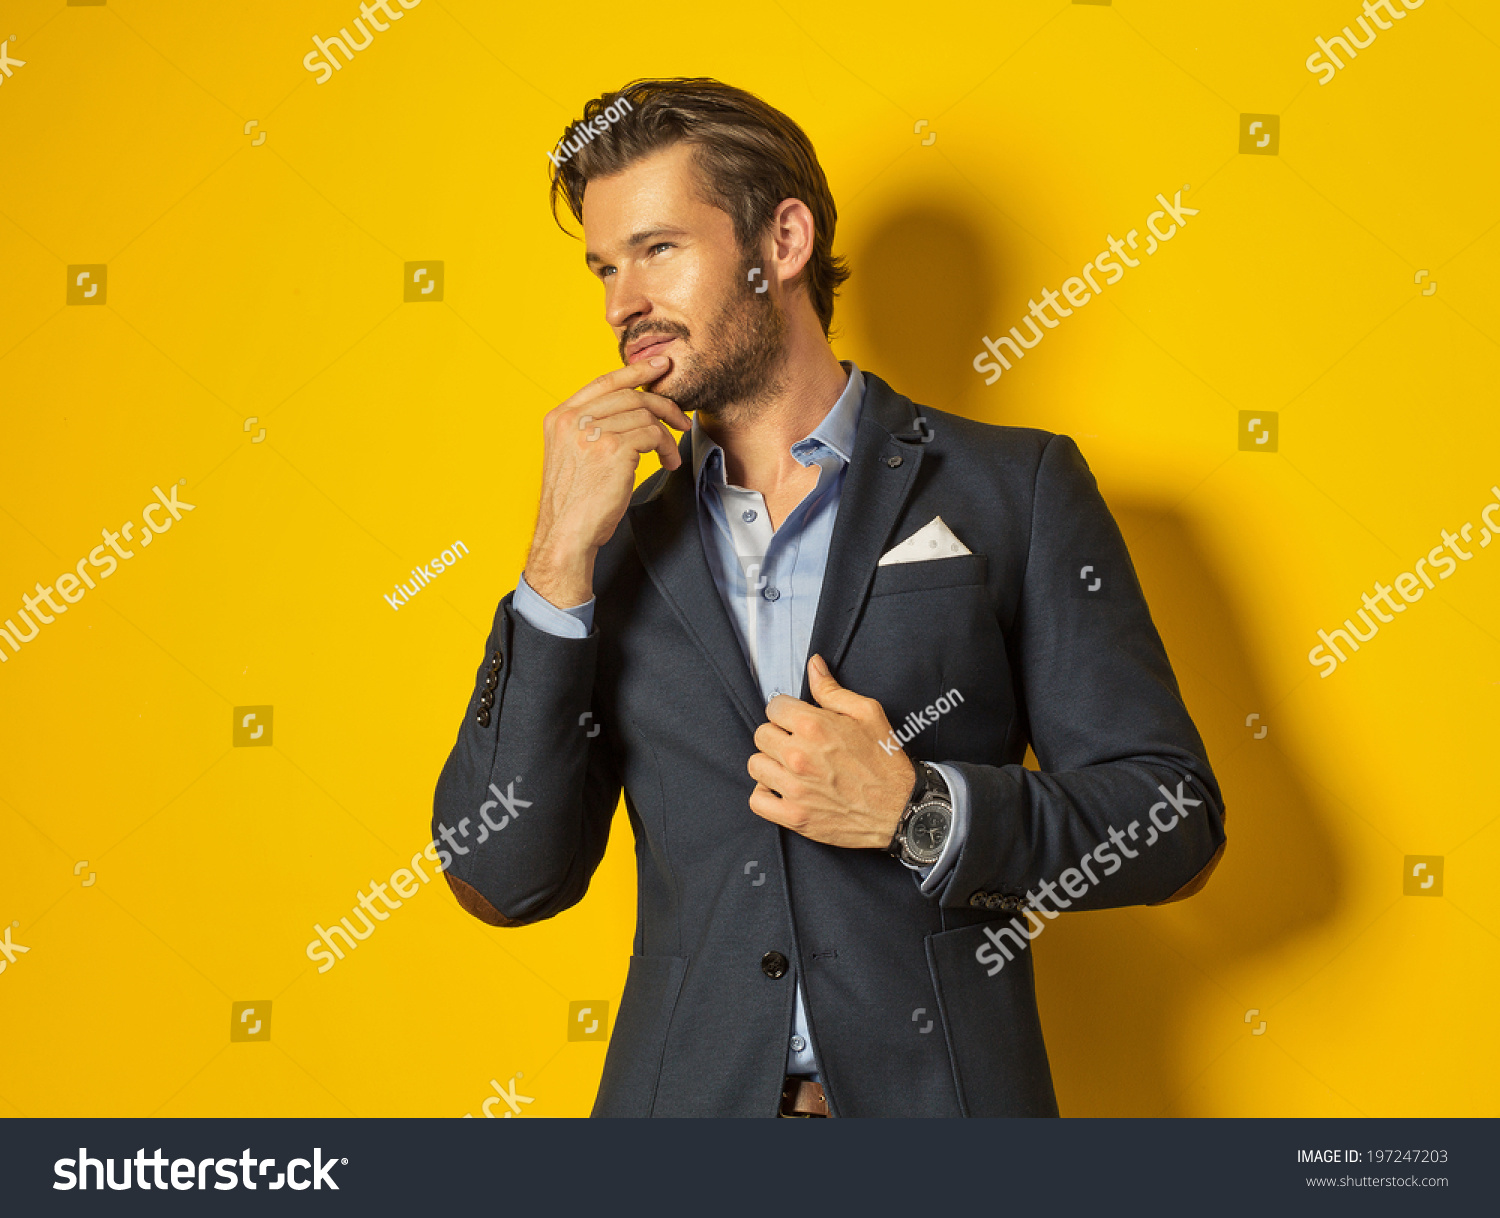 Smiling man on yellow background #197247203